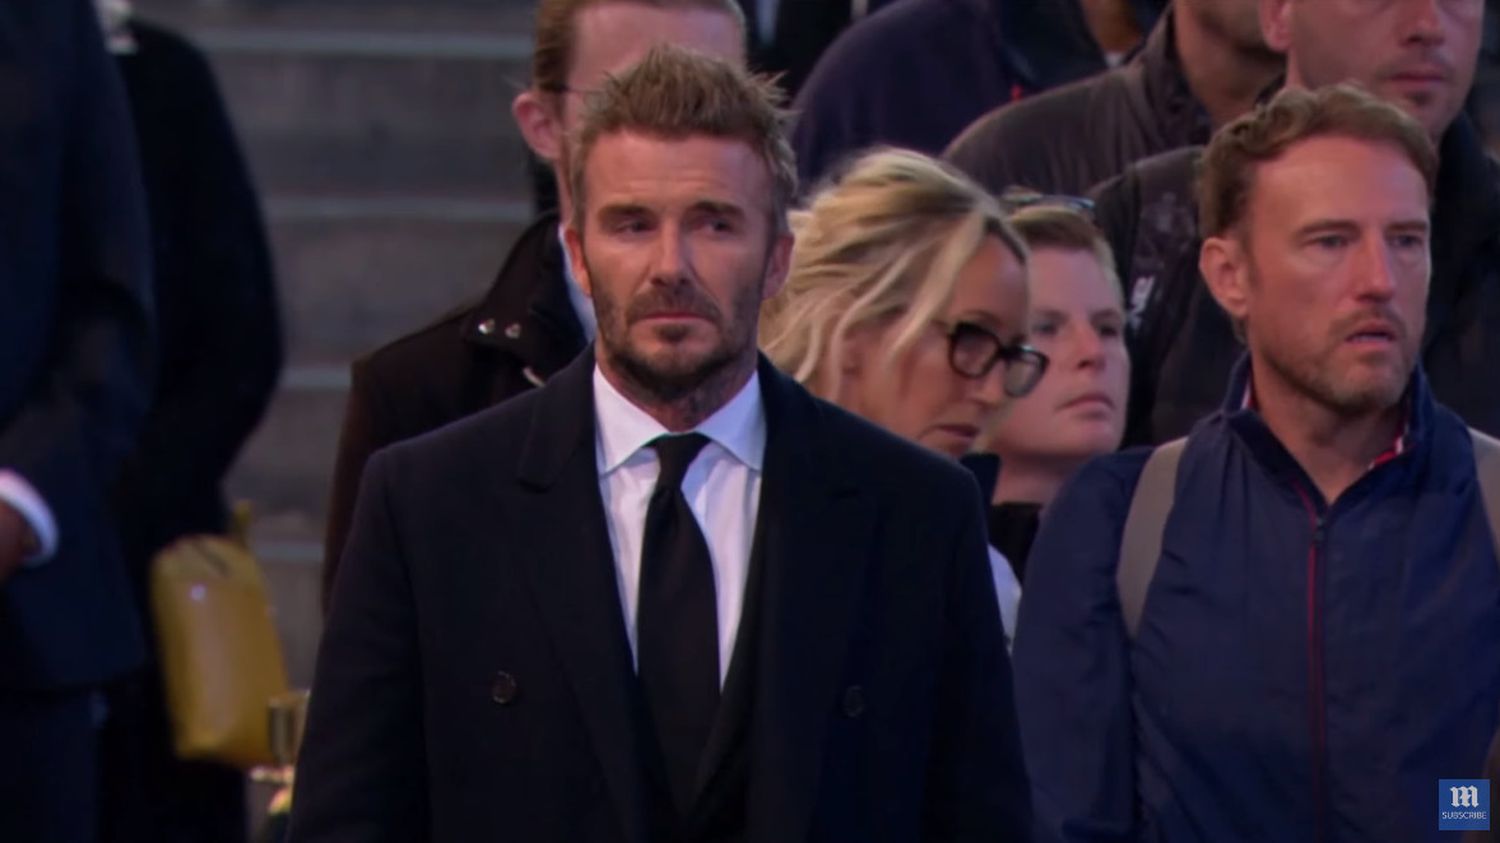  VIDEO.  Tribute to Elizabeth II: David Beckham meditates in front of the coffin after more than 13 hours of queuing
